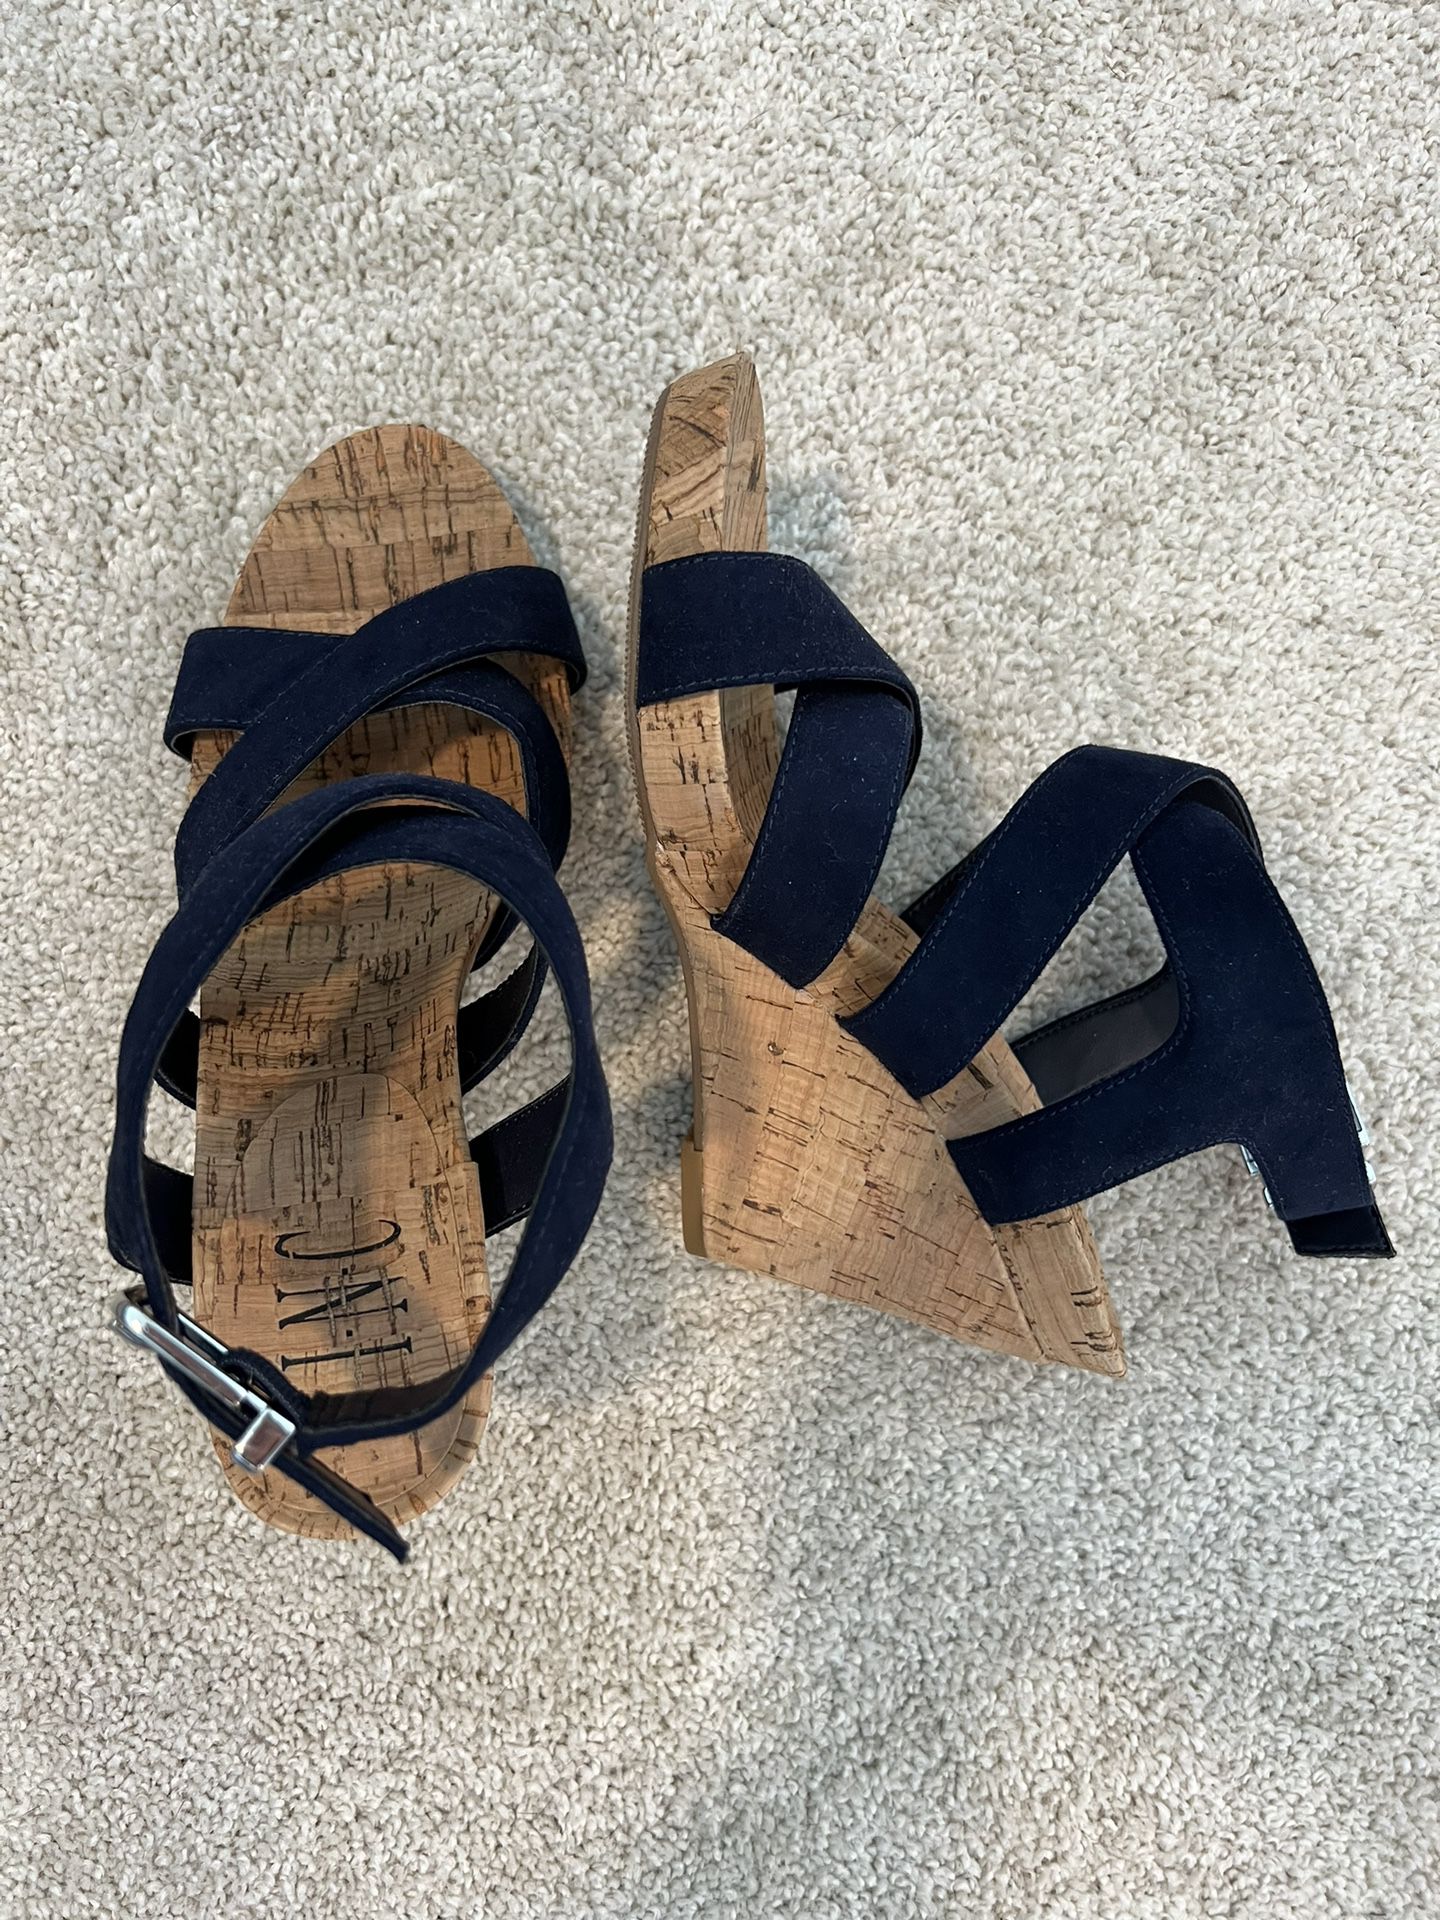 NEW INC navy blue wedges - size 6.5